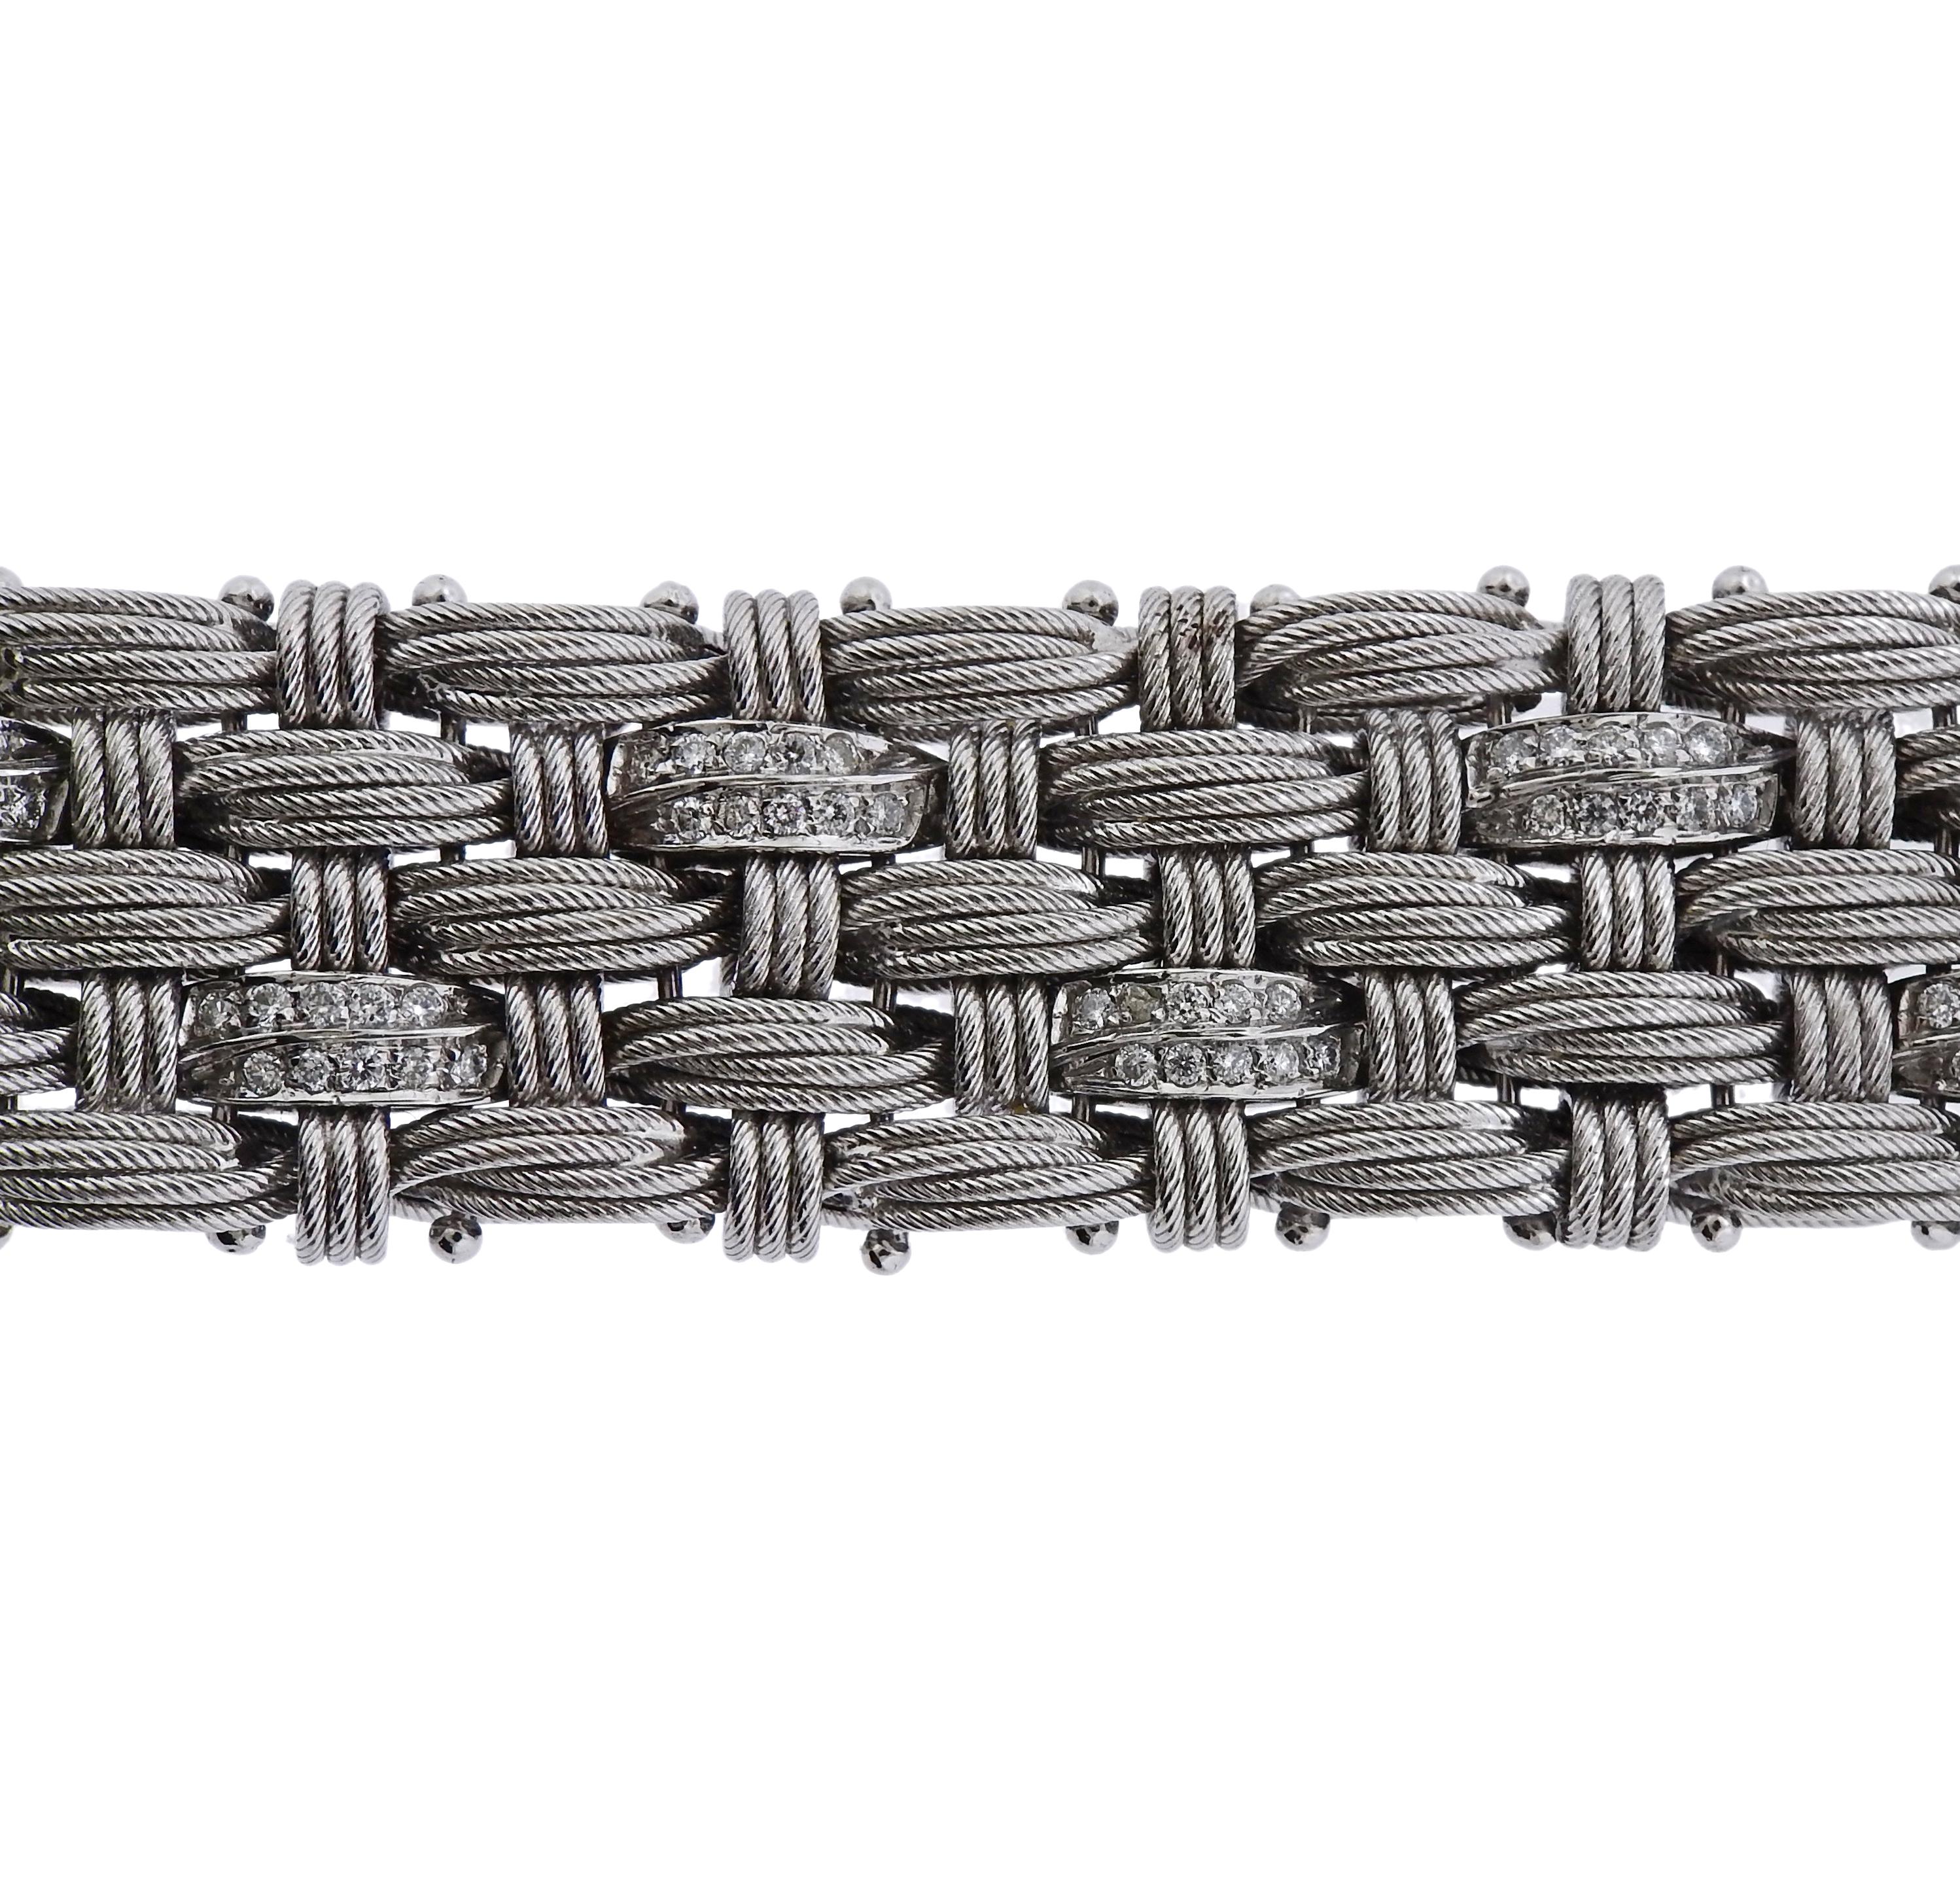 14k white gold Italian made woven motif bracelet, decorated with approximately 1.40ctw in H/VS diamonds.  Bracelet is 7.5